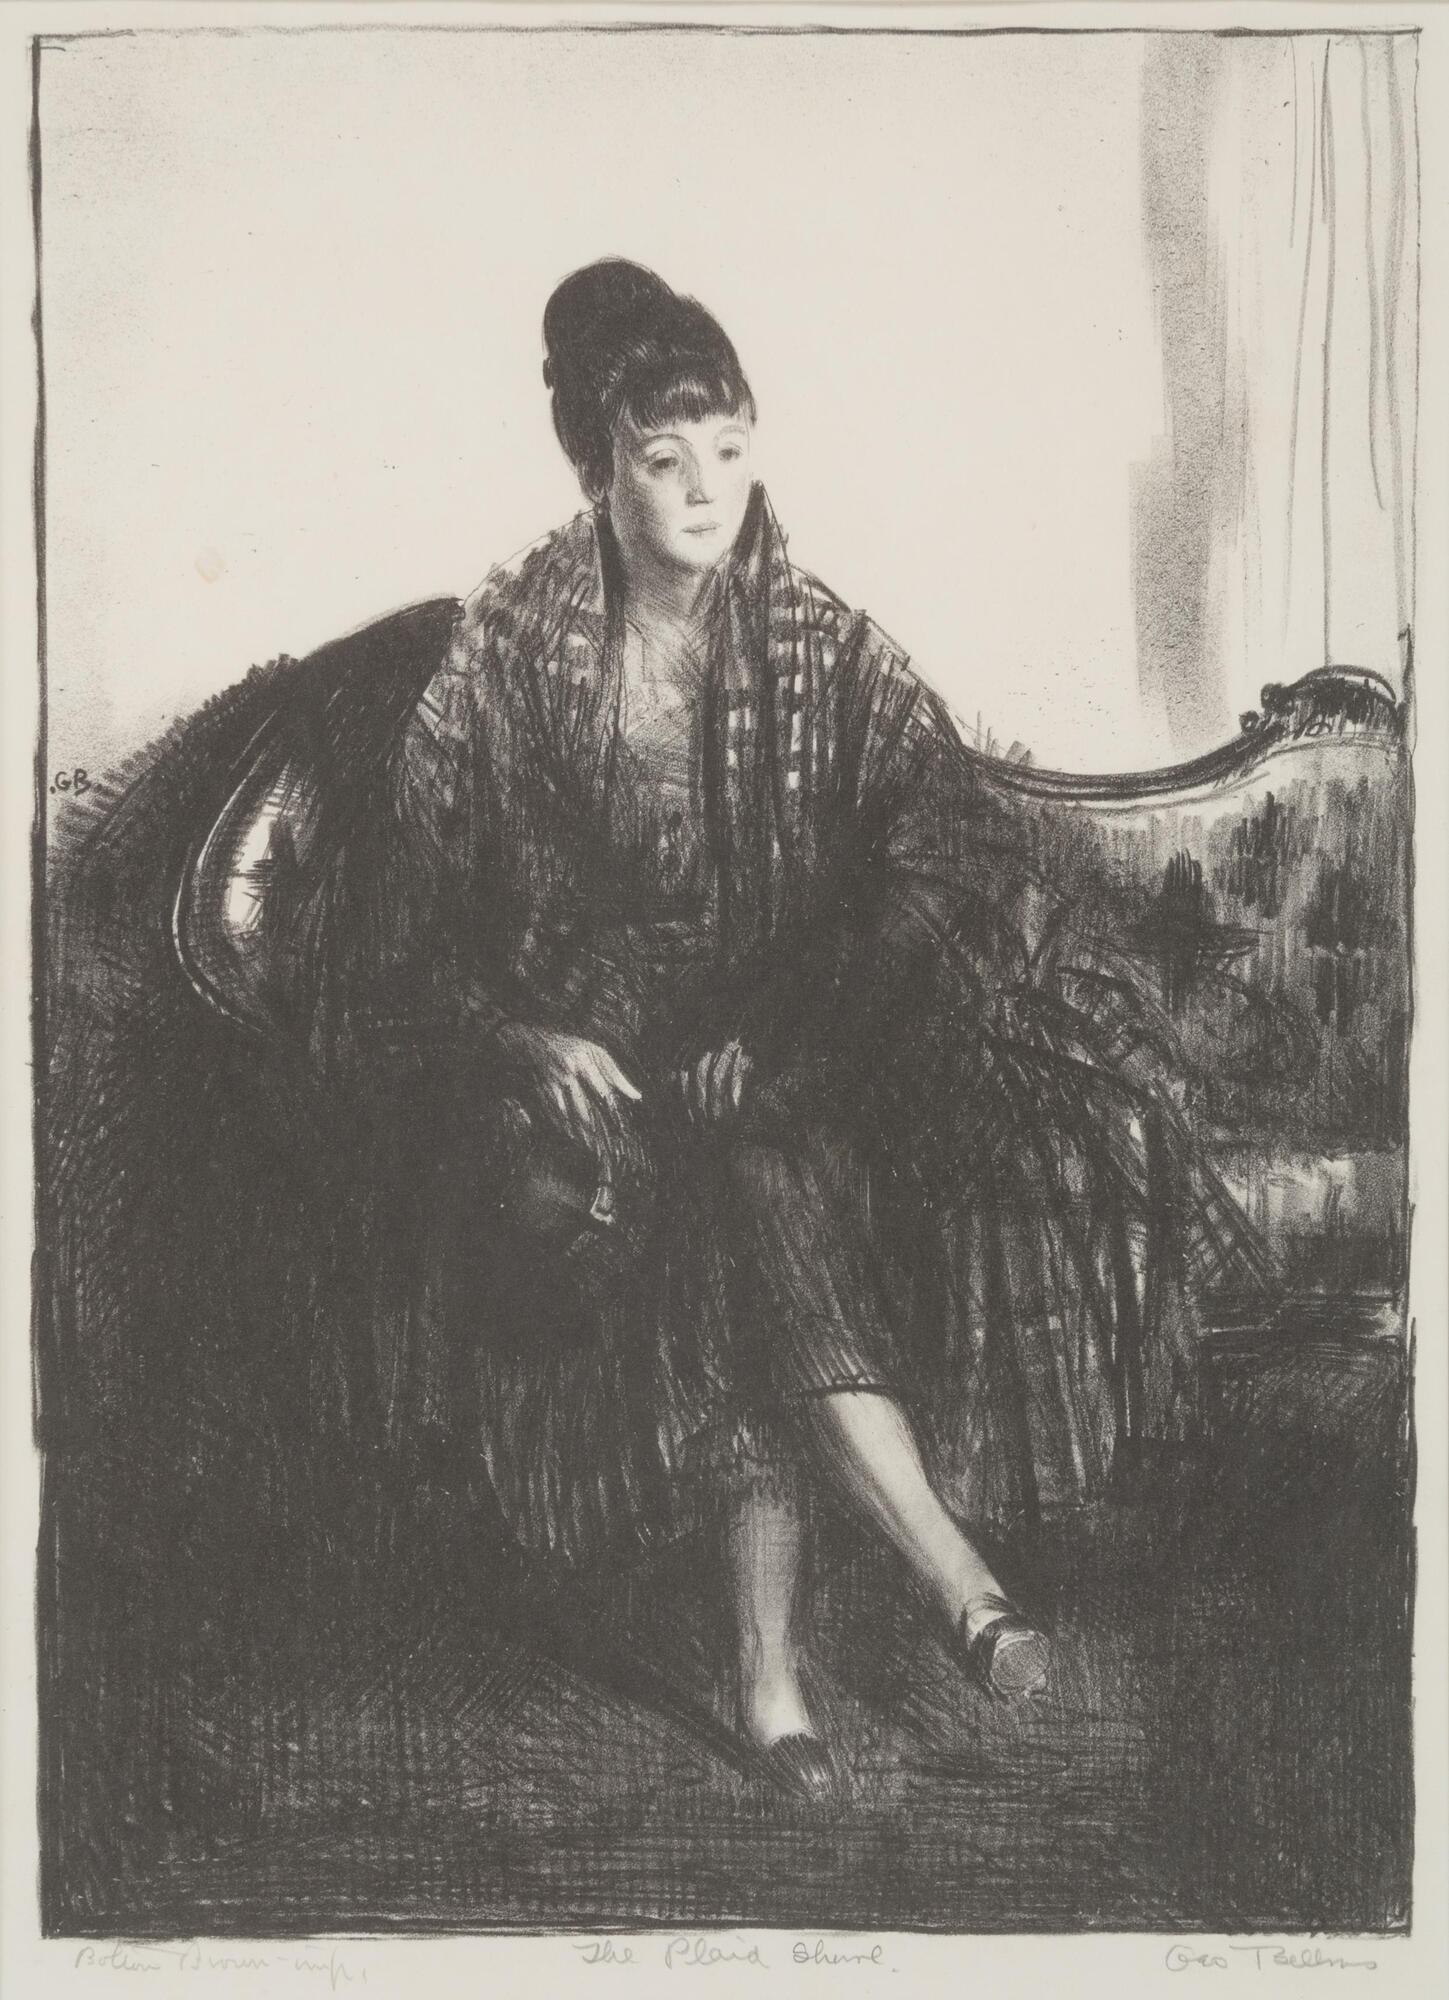 A portrait of a woman seated on a sofa. The figure wears a dress complemented by a plaid shawl around her shoulders. She looks out beyond the pictorial space of the image.